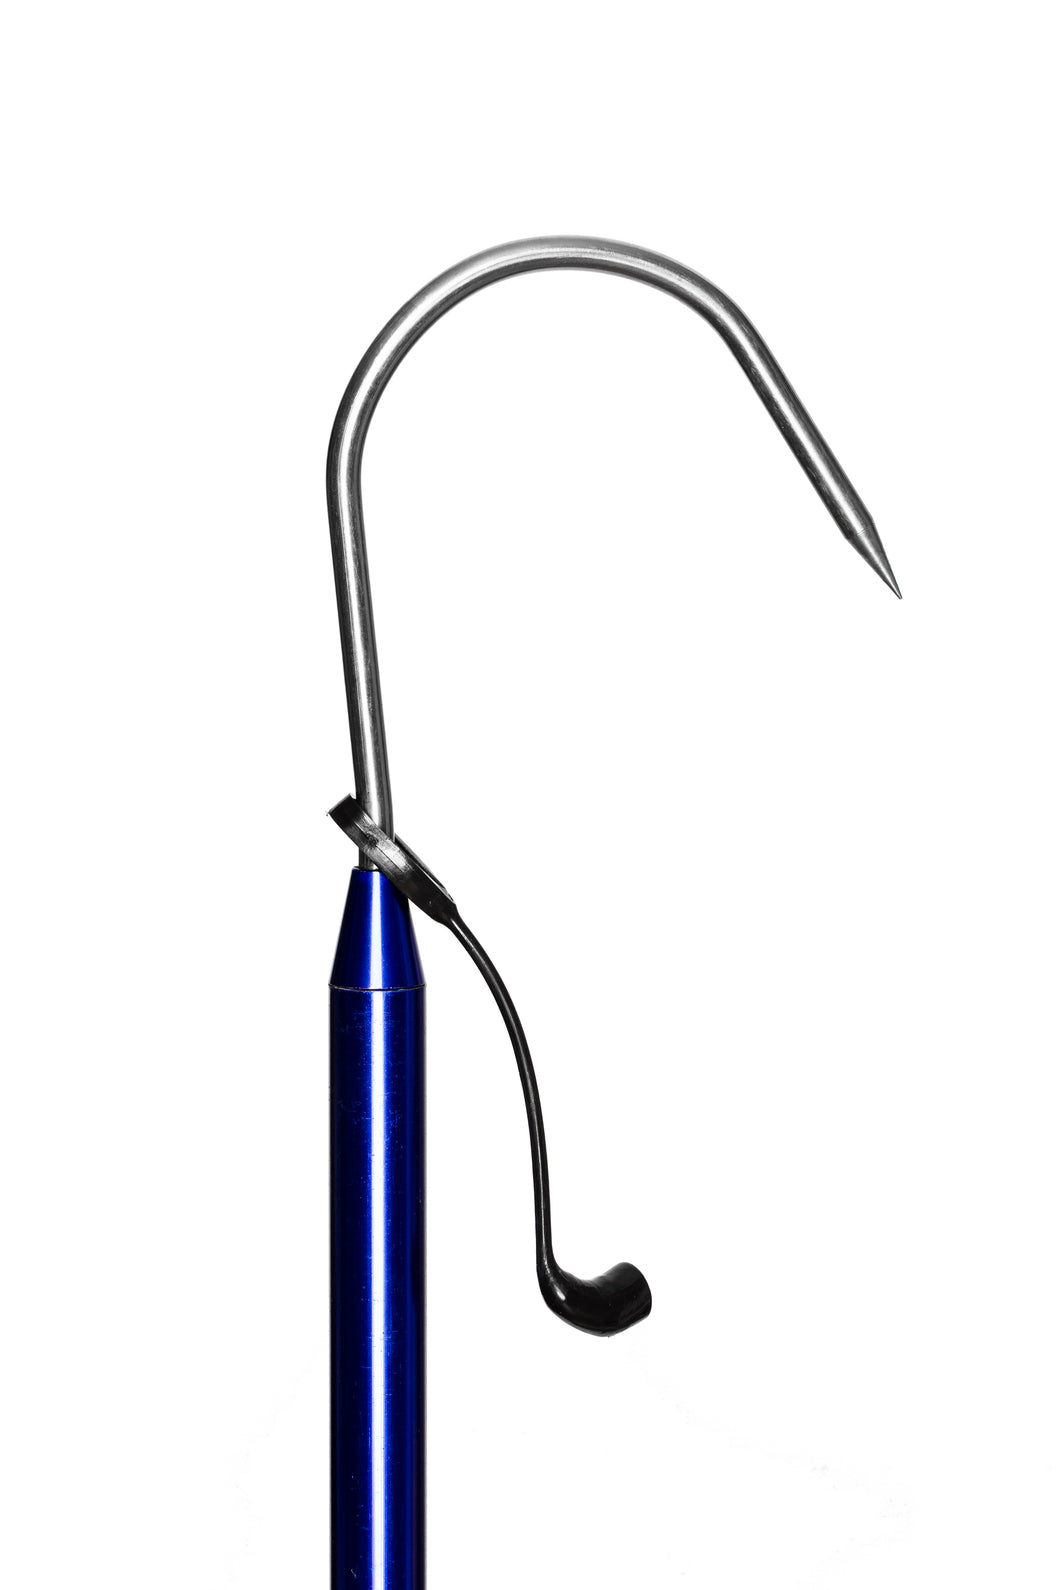 GAFFER SPORTFISHING Extendable Aluminum Fish Gaff with Sharp Stainless Steel  Fishing Spear Hook, Lightweight Sturdy Fishing Pole